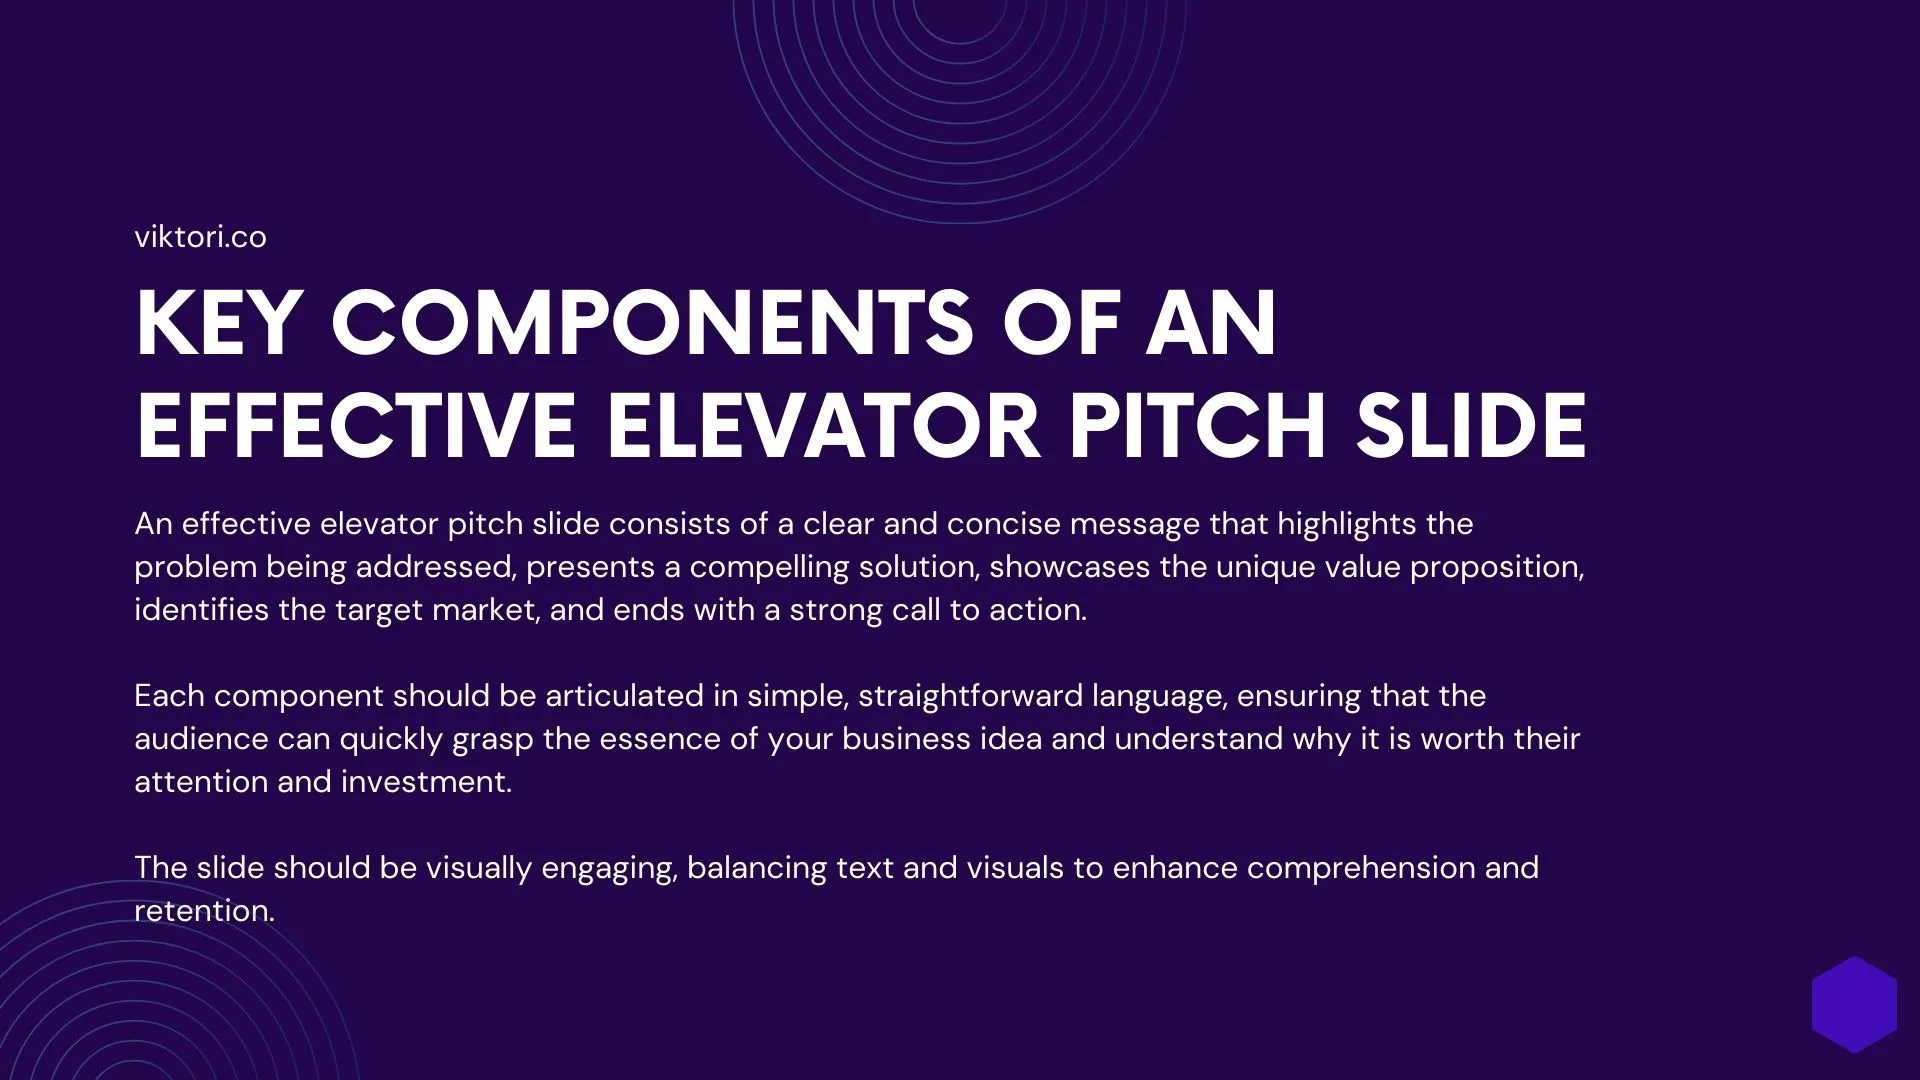 Key Components of an Effective Elevator Pitch Slide